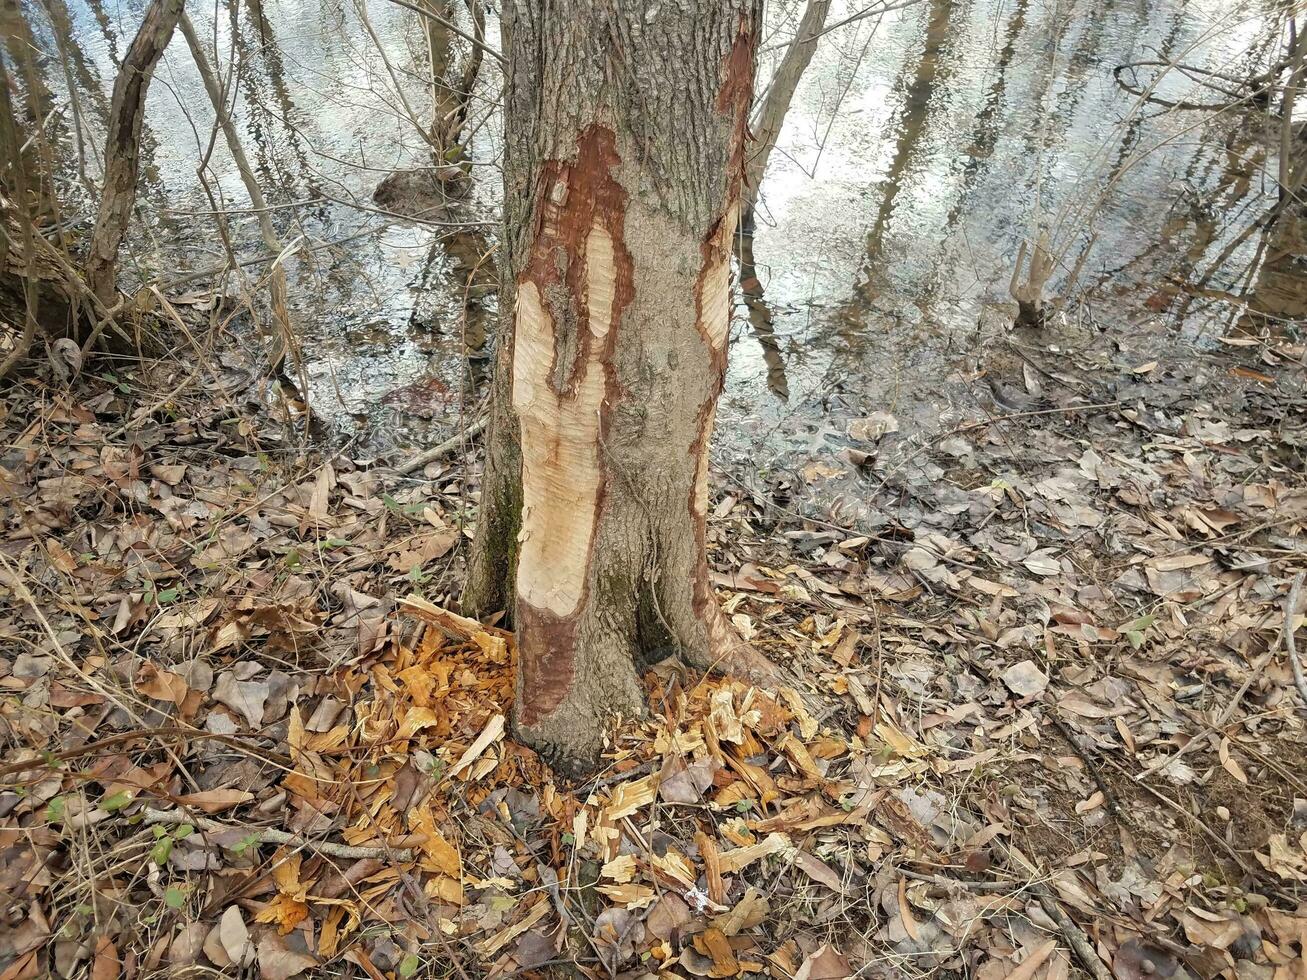 beaver bite marks on tree trunk and water and trees in forest in wetland area photo